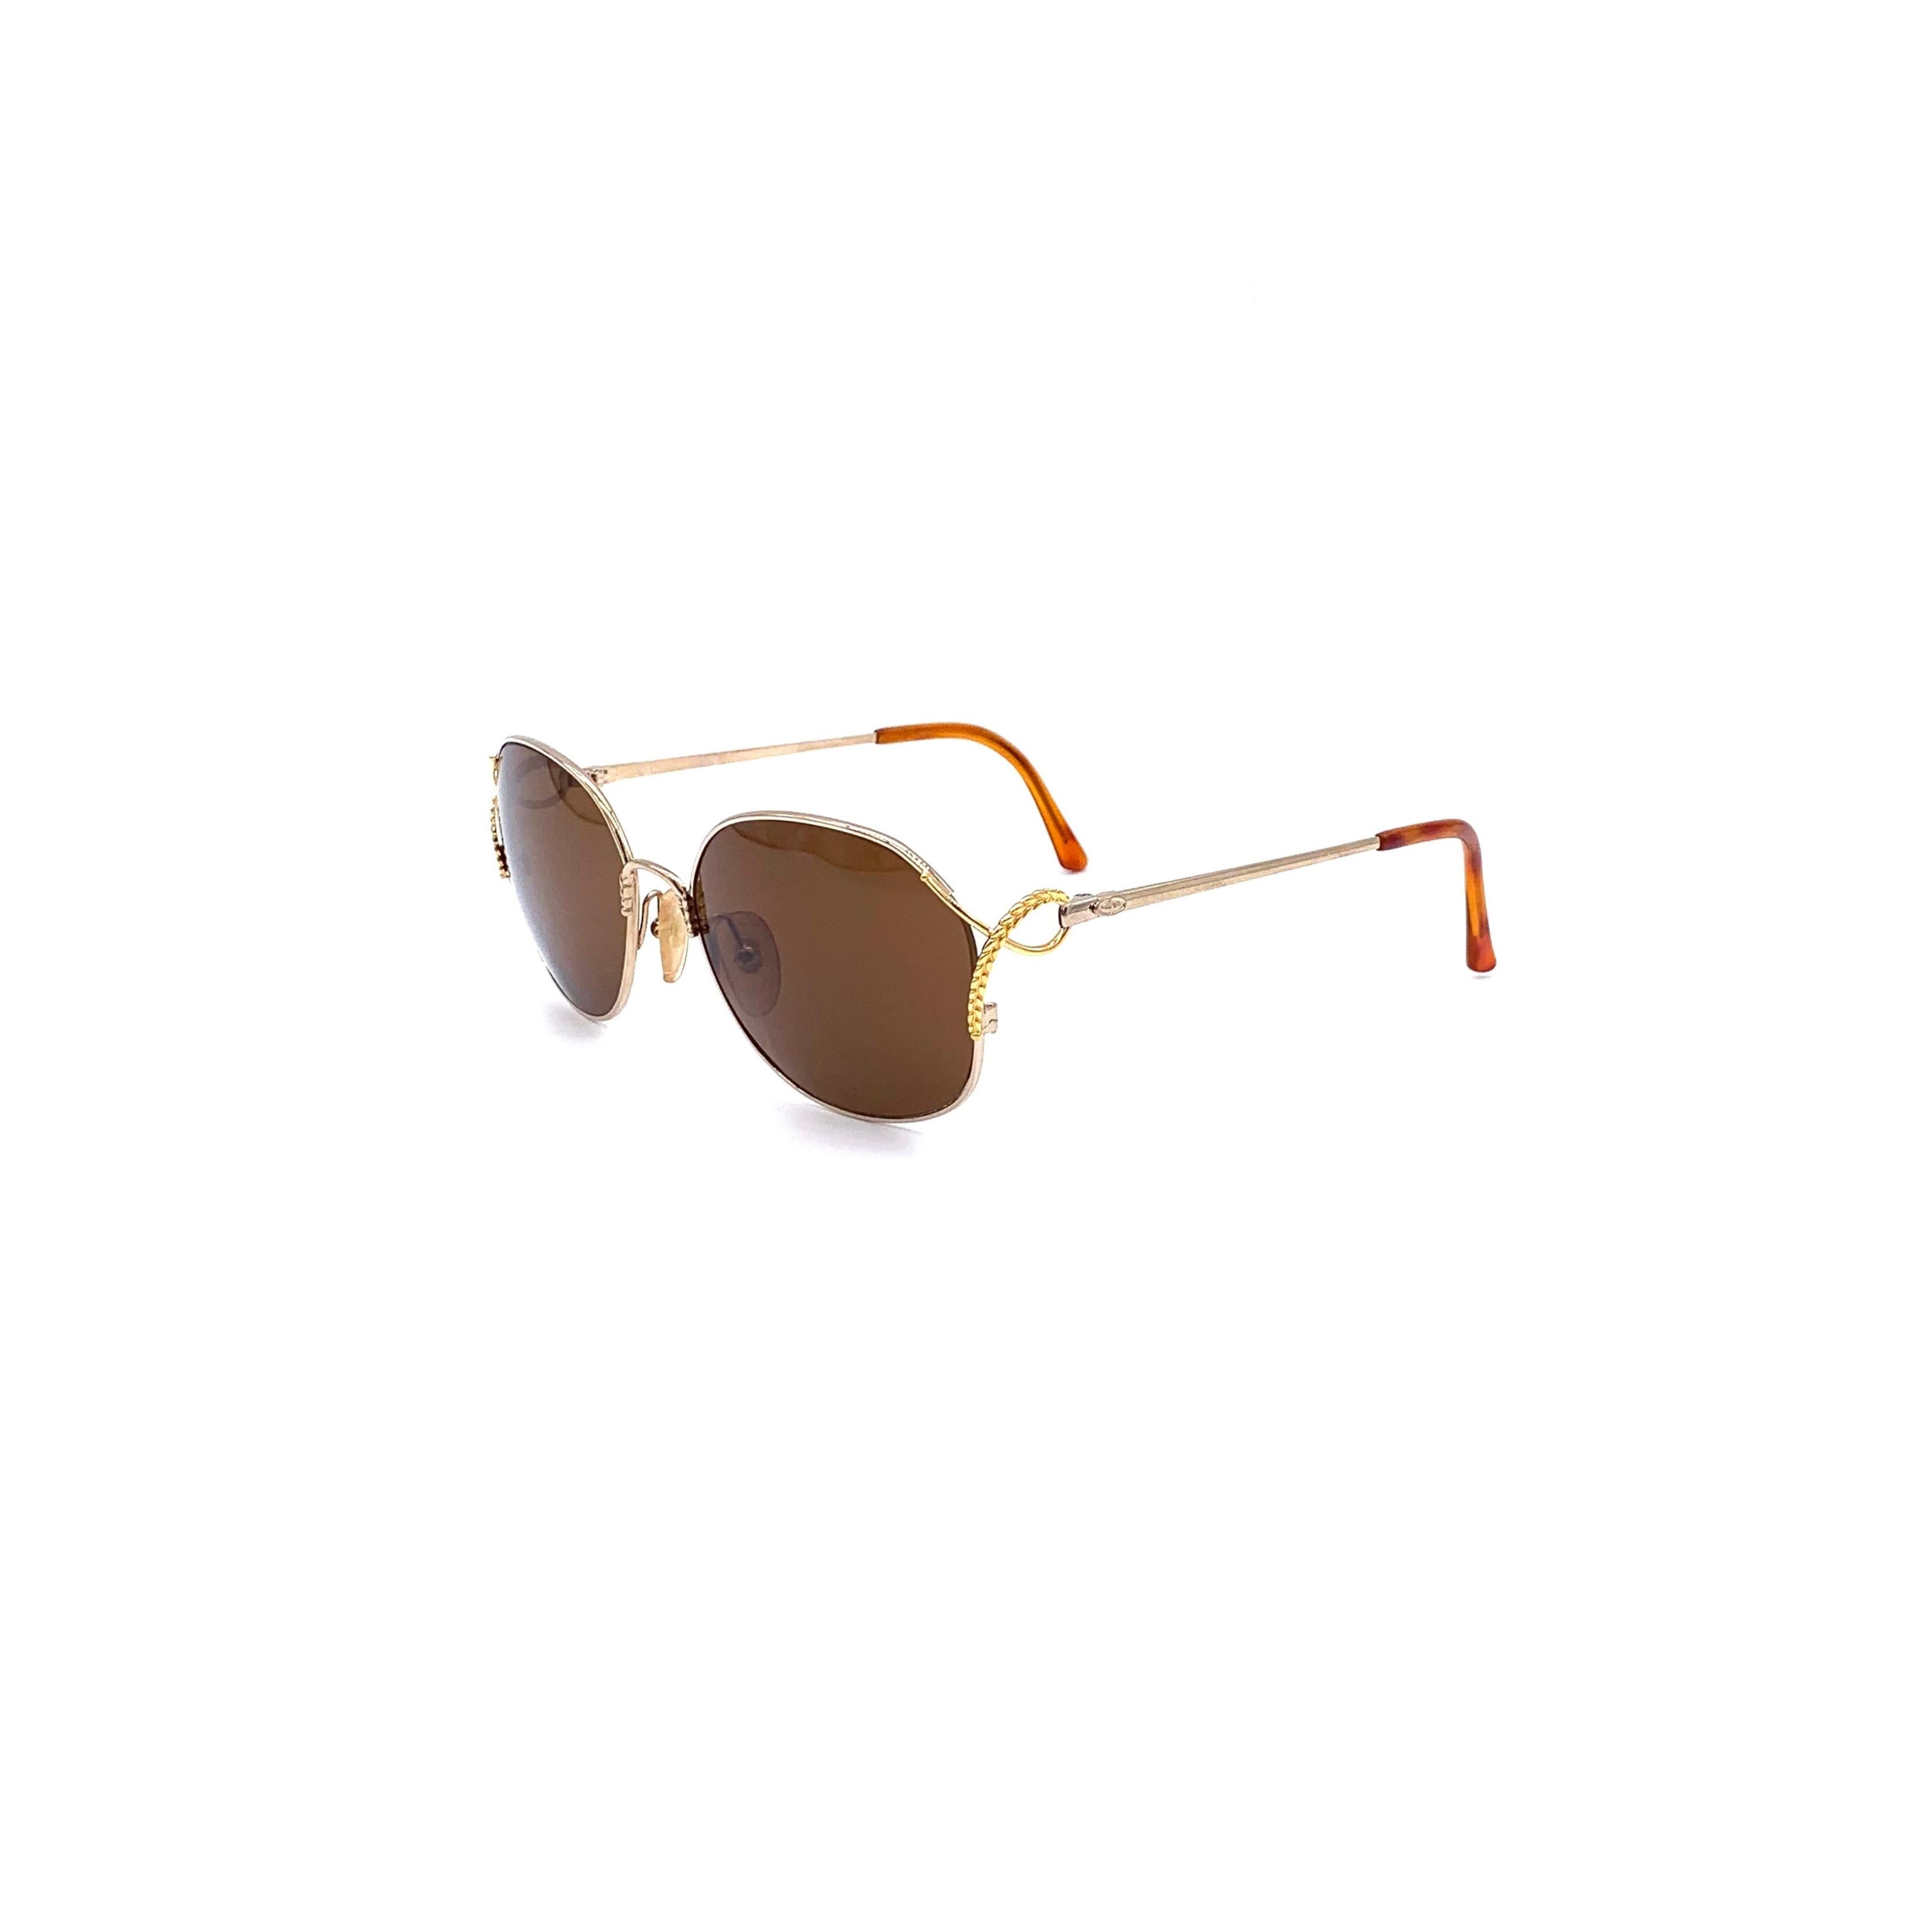 These classic Christian Dior sunglasses are constructed with a gold metal frame and Optyl lenses in a brown shade. A distinctive leaf pattern detail accentuates the sides of the frame, providing 80s appeal with modern protection from the sun.